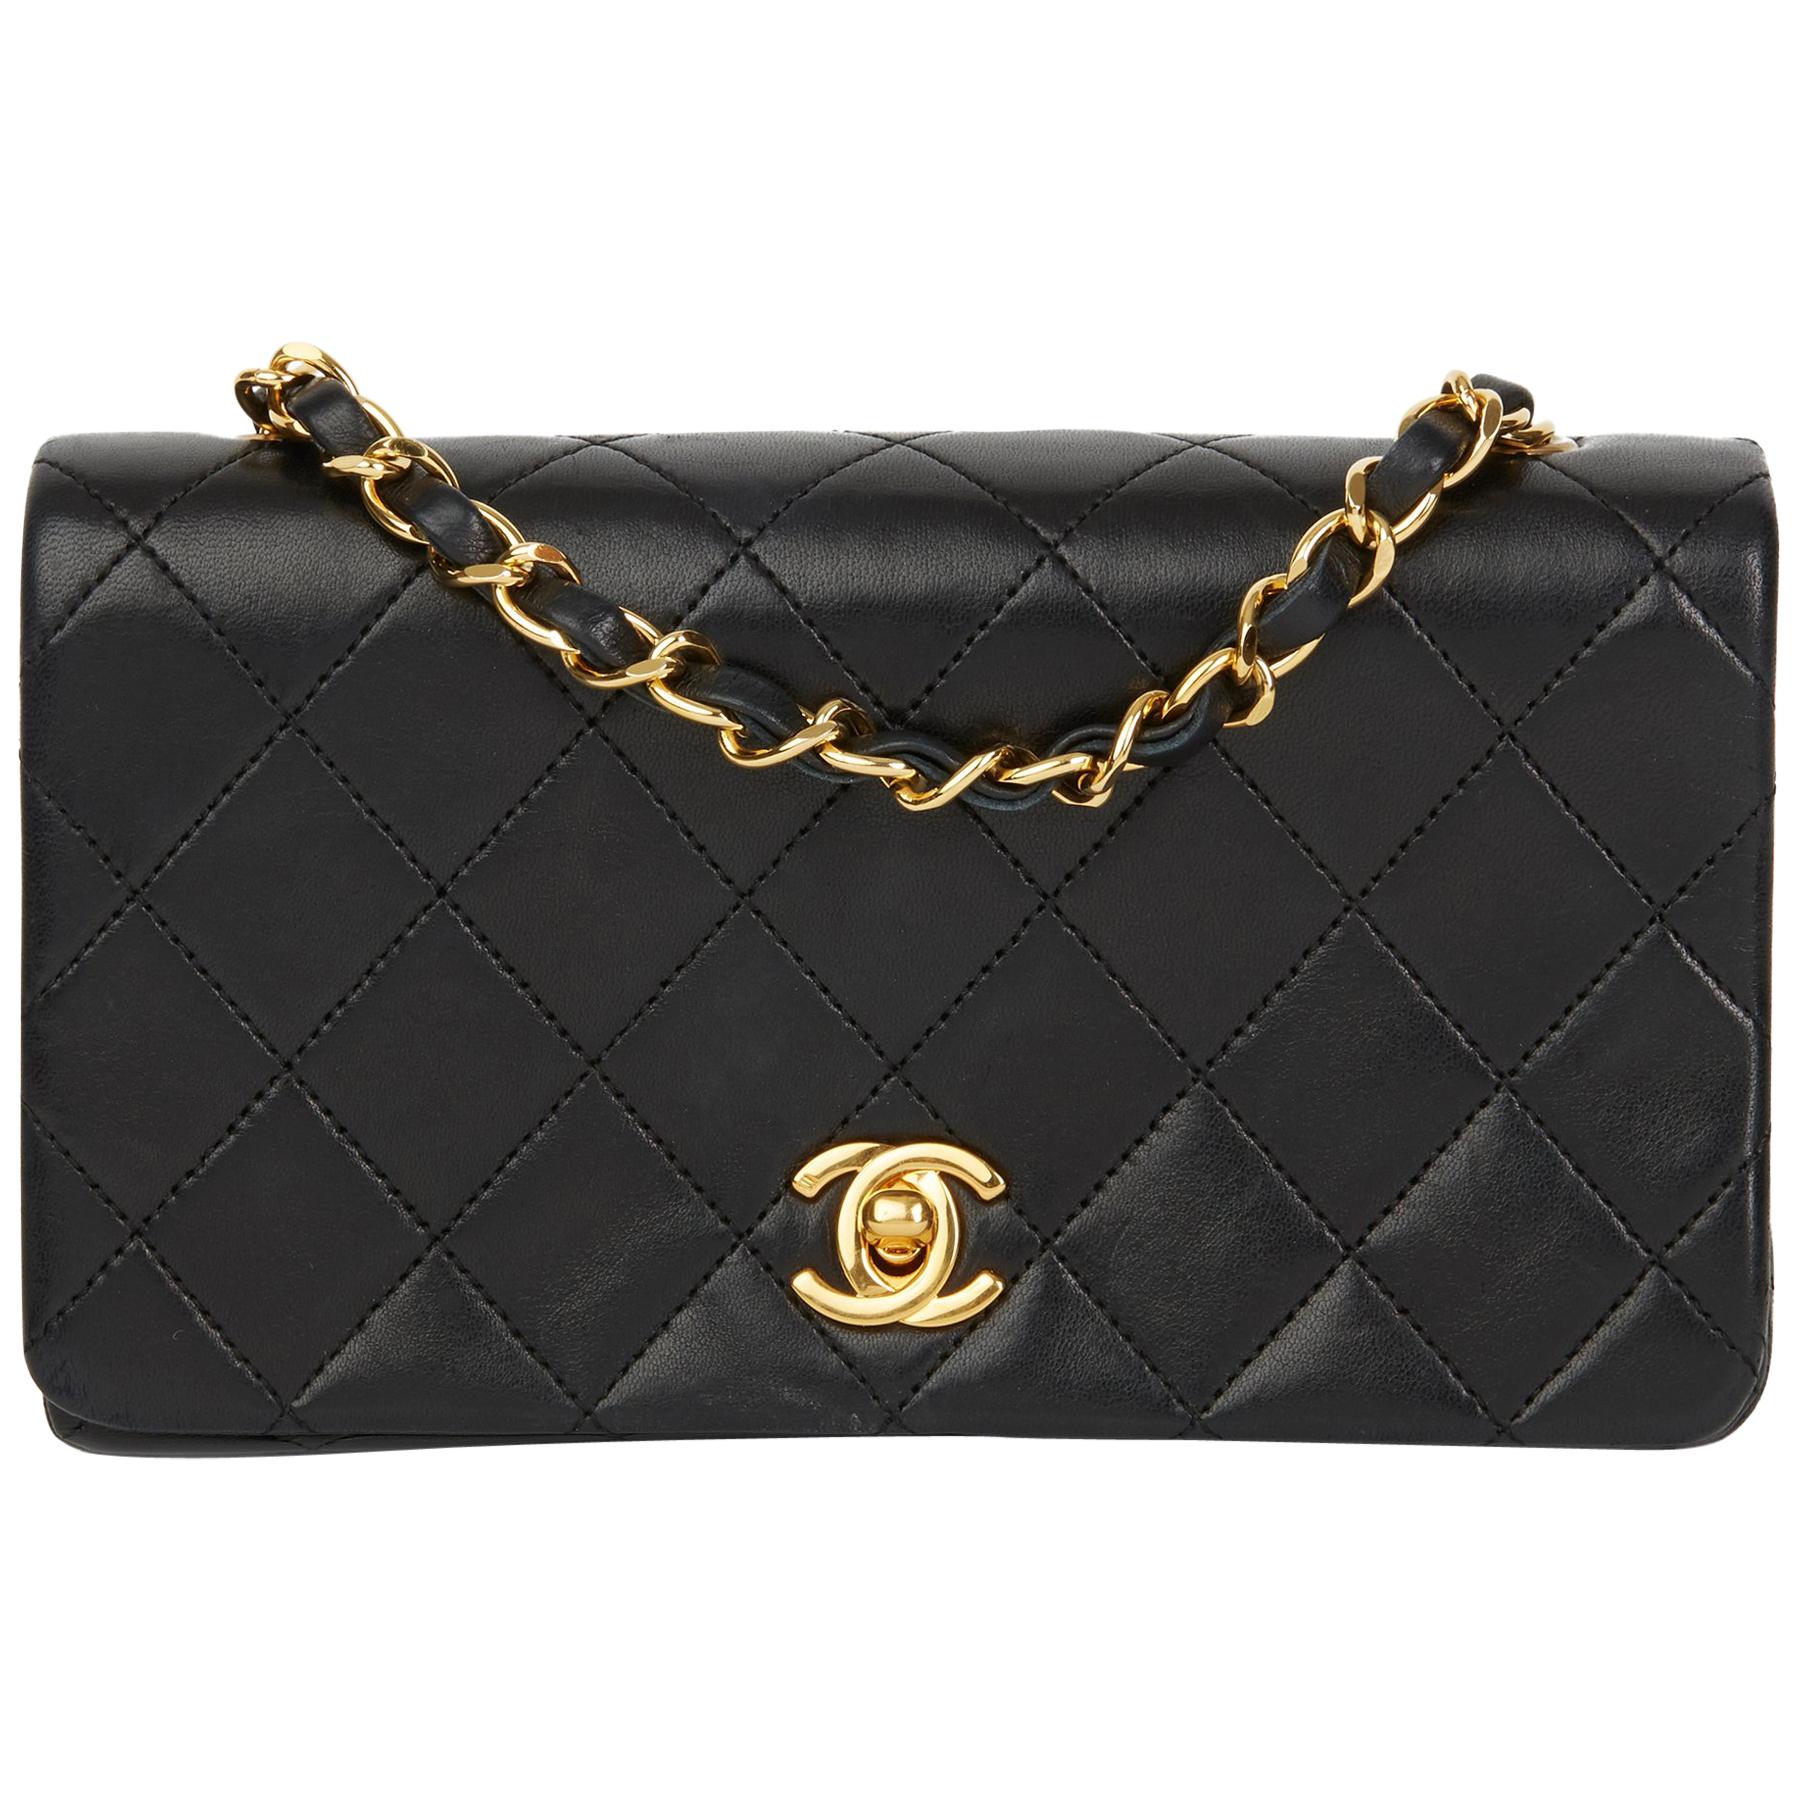 1990 Chanel Black Quilted Lambskin Vintage Mini Flap Bag